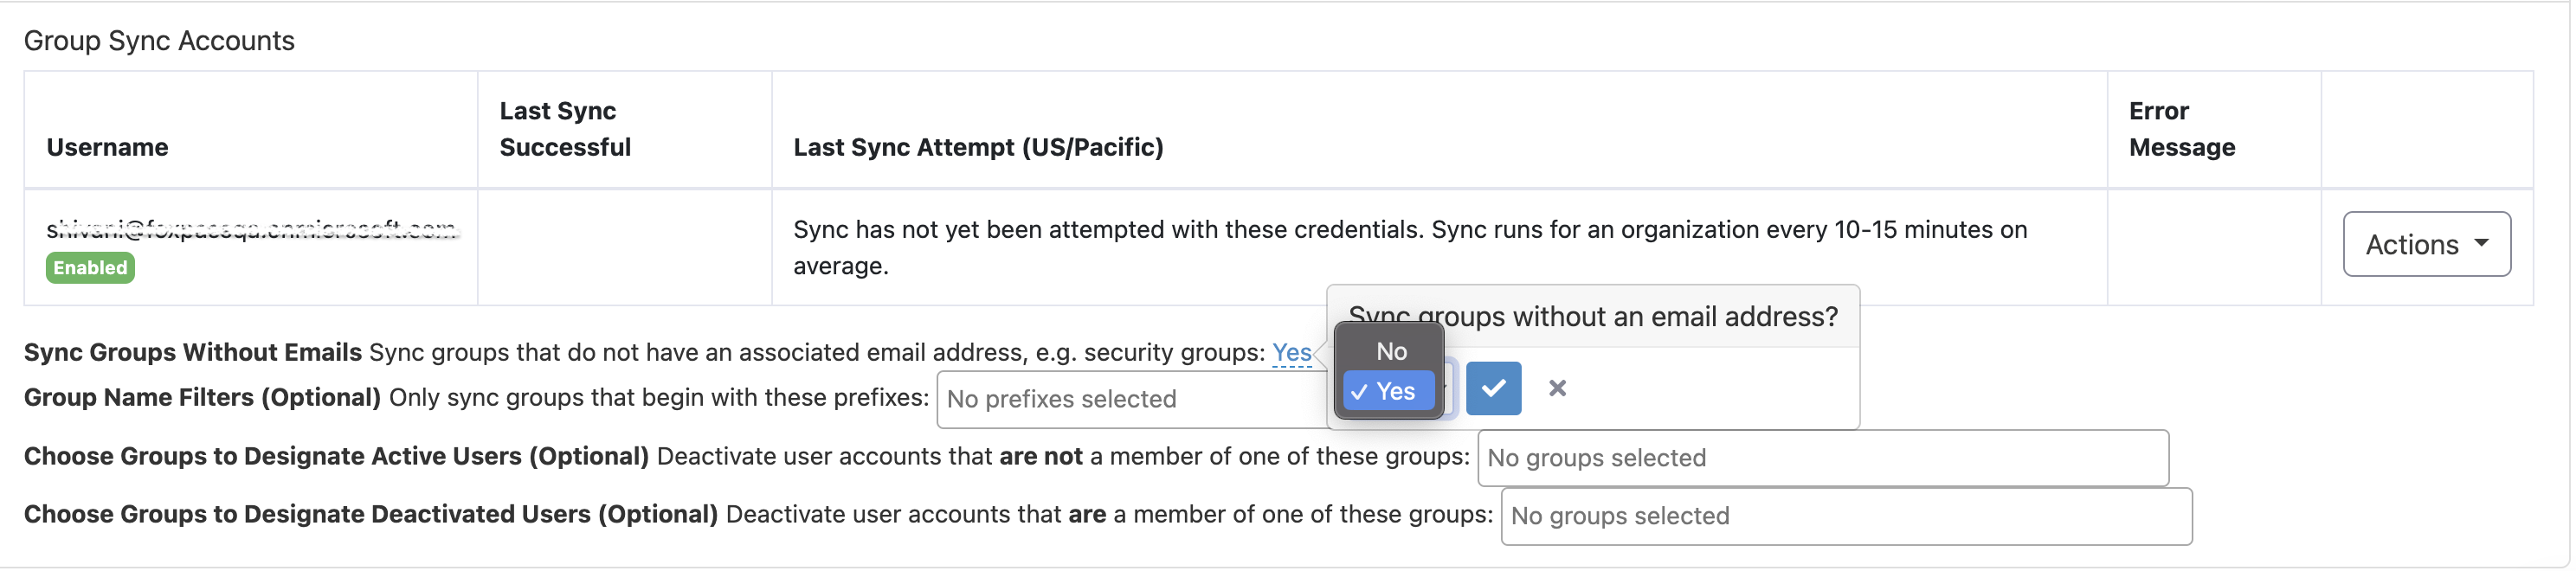 Select 'Yes' to Sync groups without emails